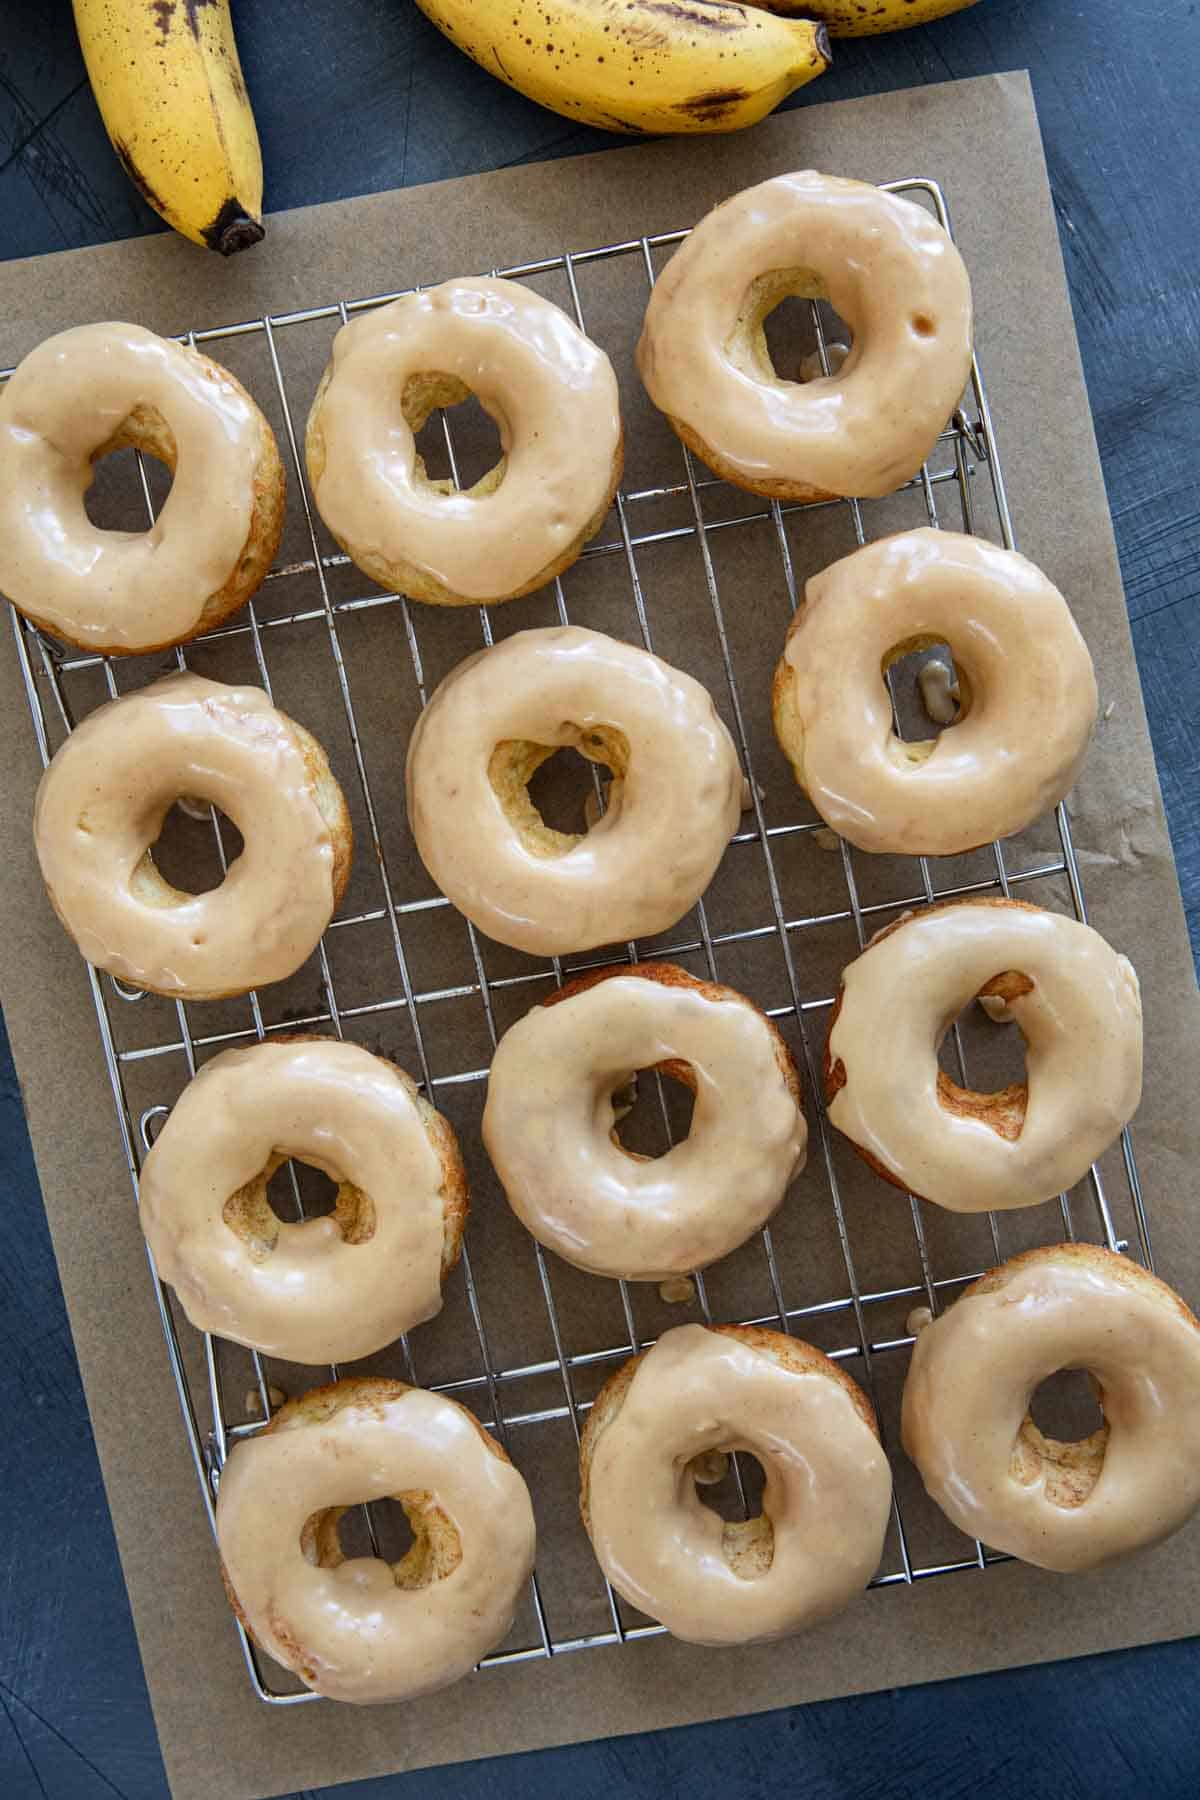 Banana donuts frosted with peanut butter icing on a cooling rack.